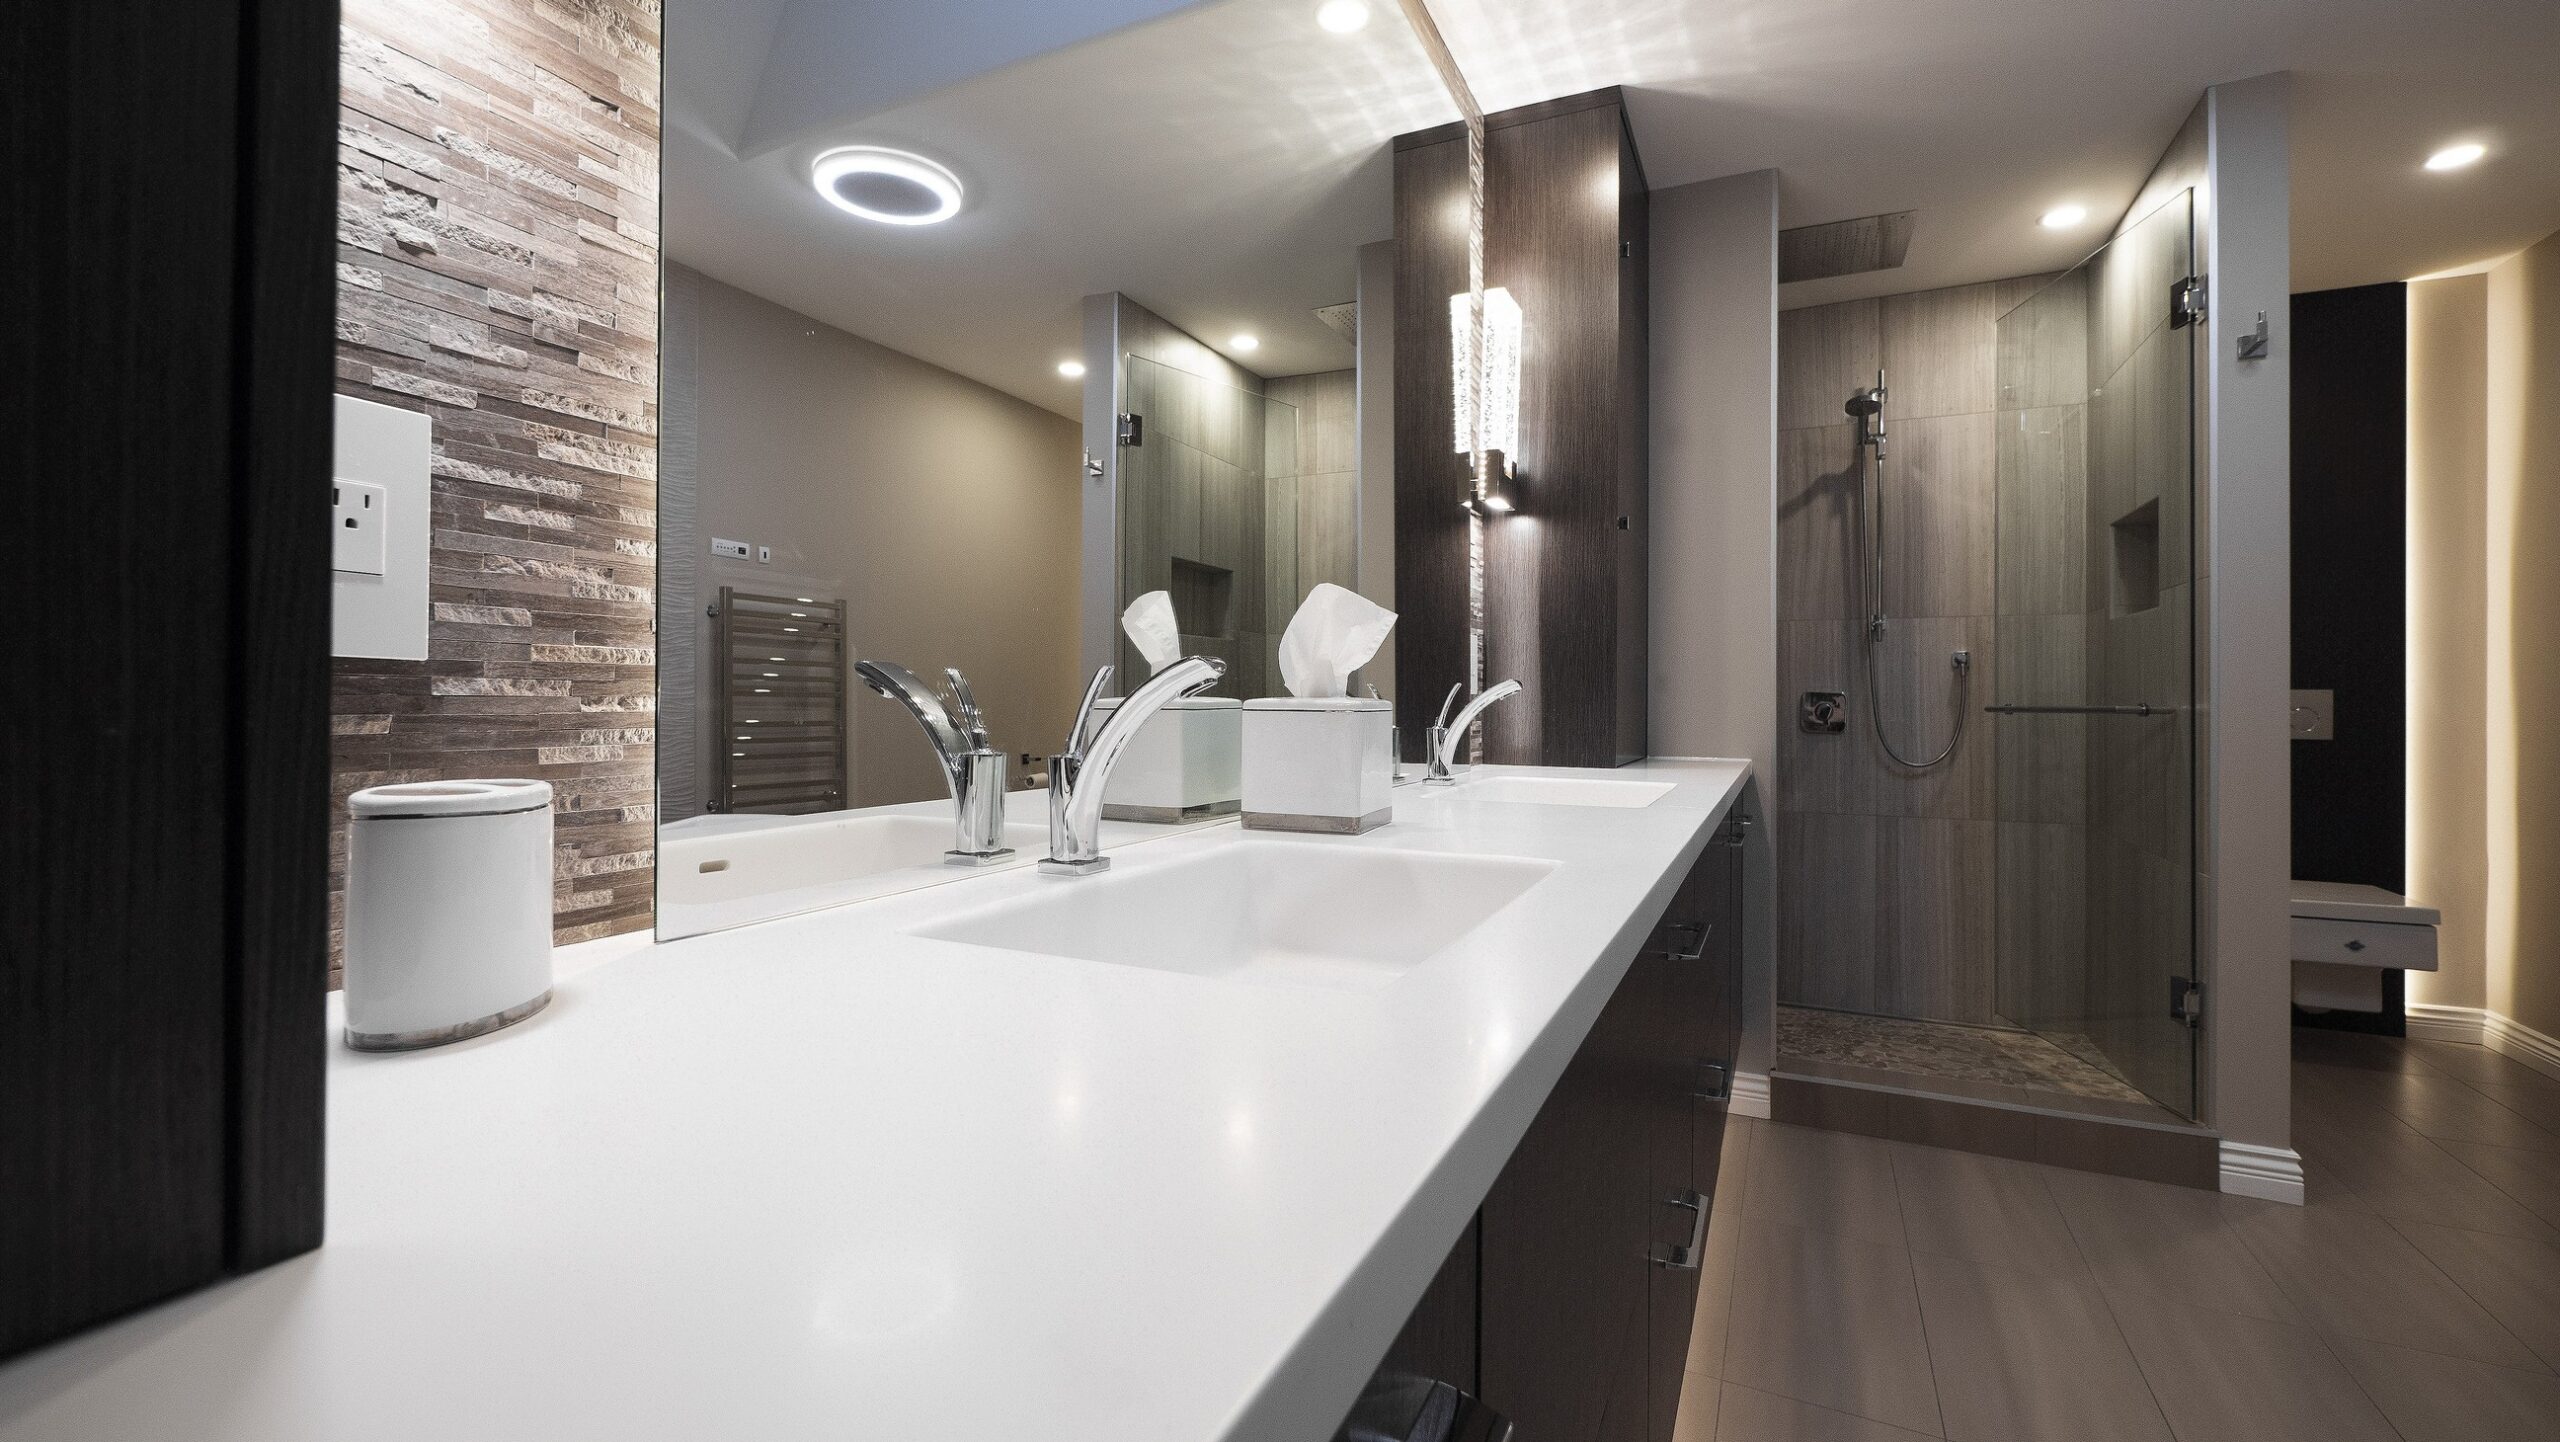 Stylish bathroom renovation by Stylux, a top Home Renovation Company in Vancouver